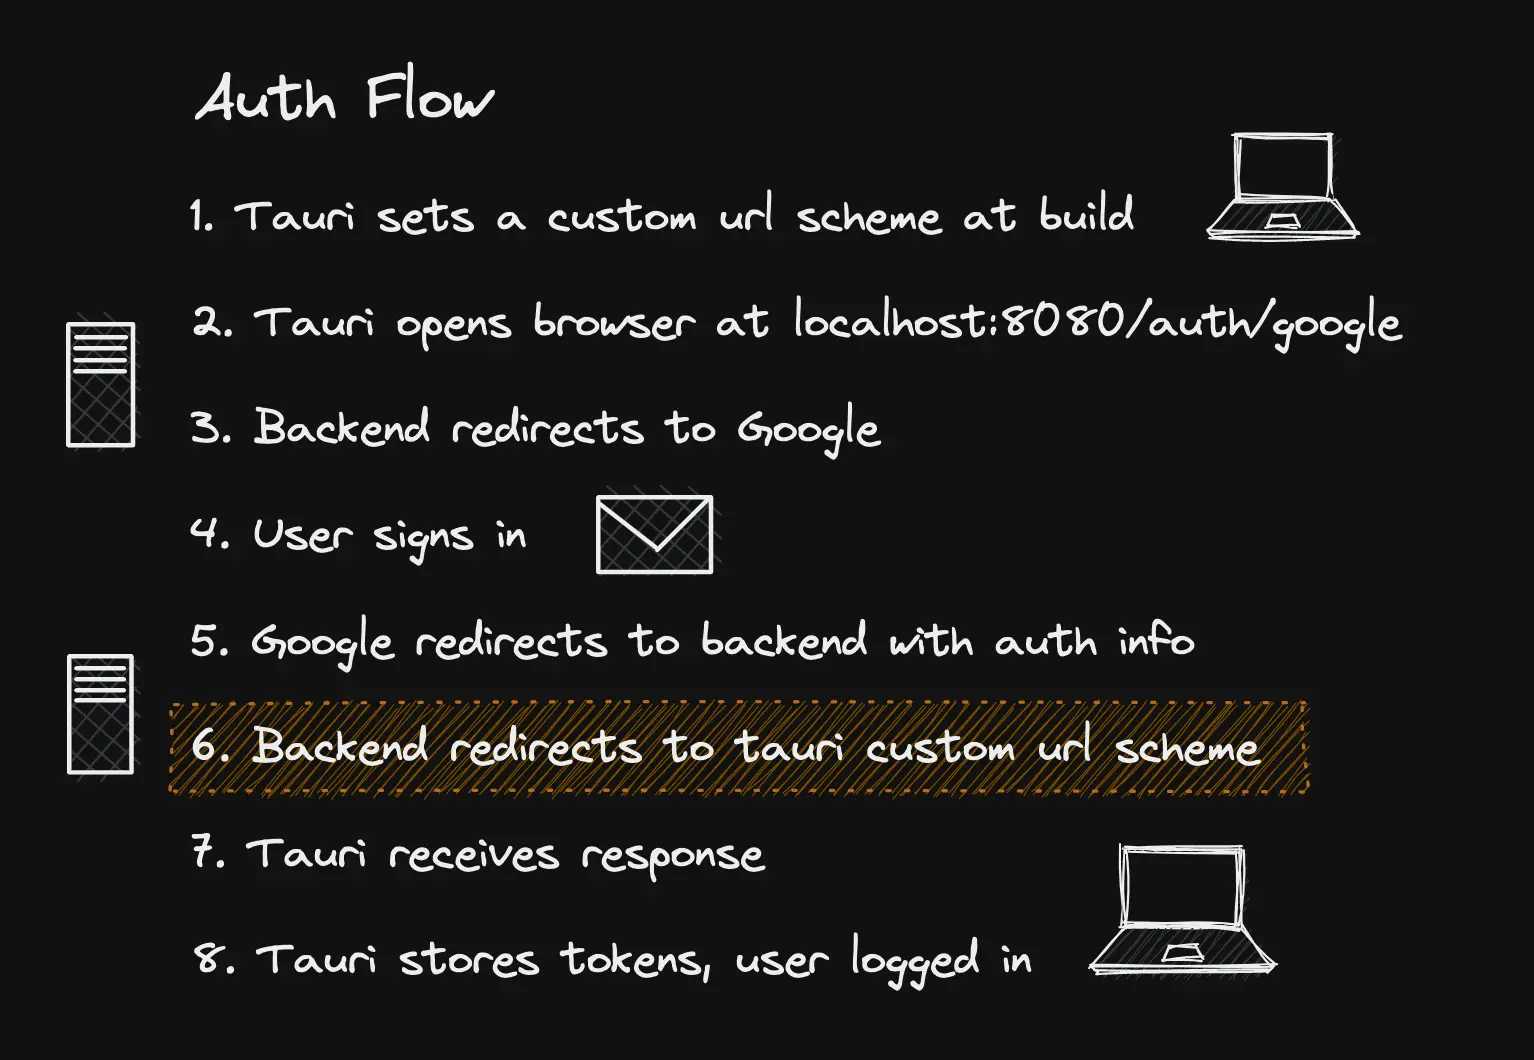 auth flow showcase in steps